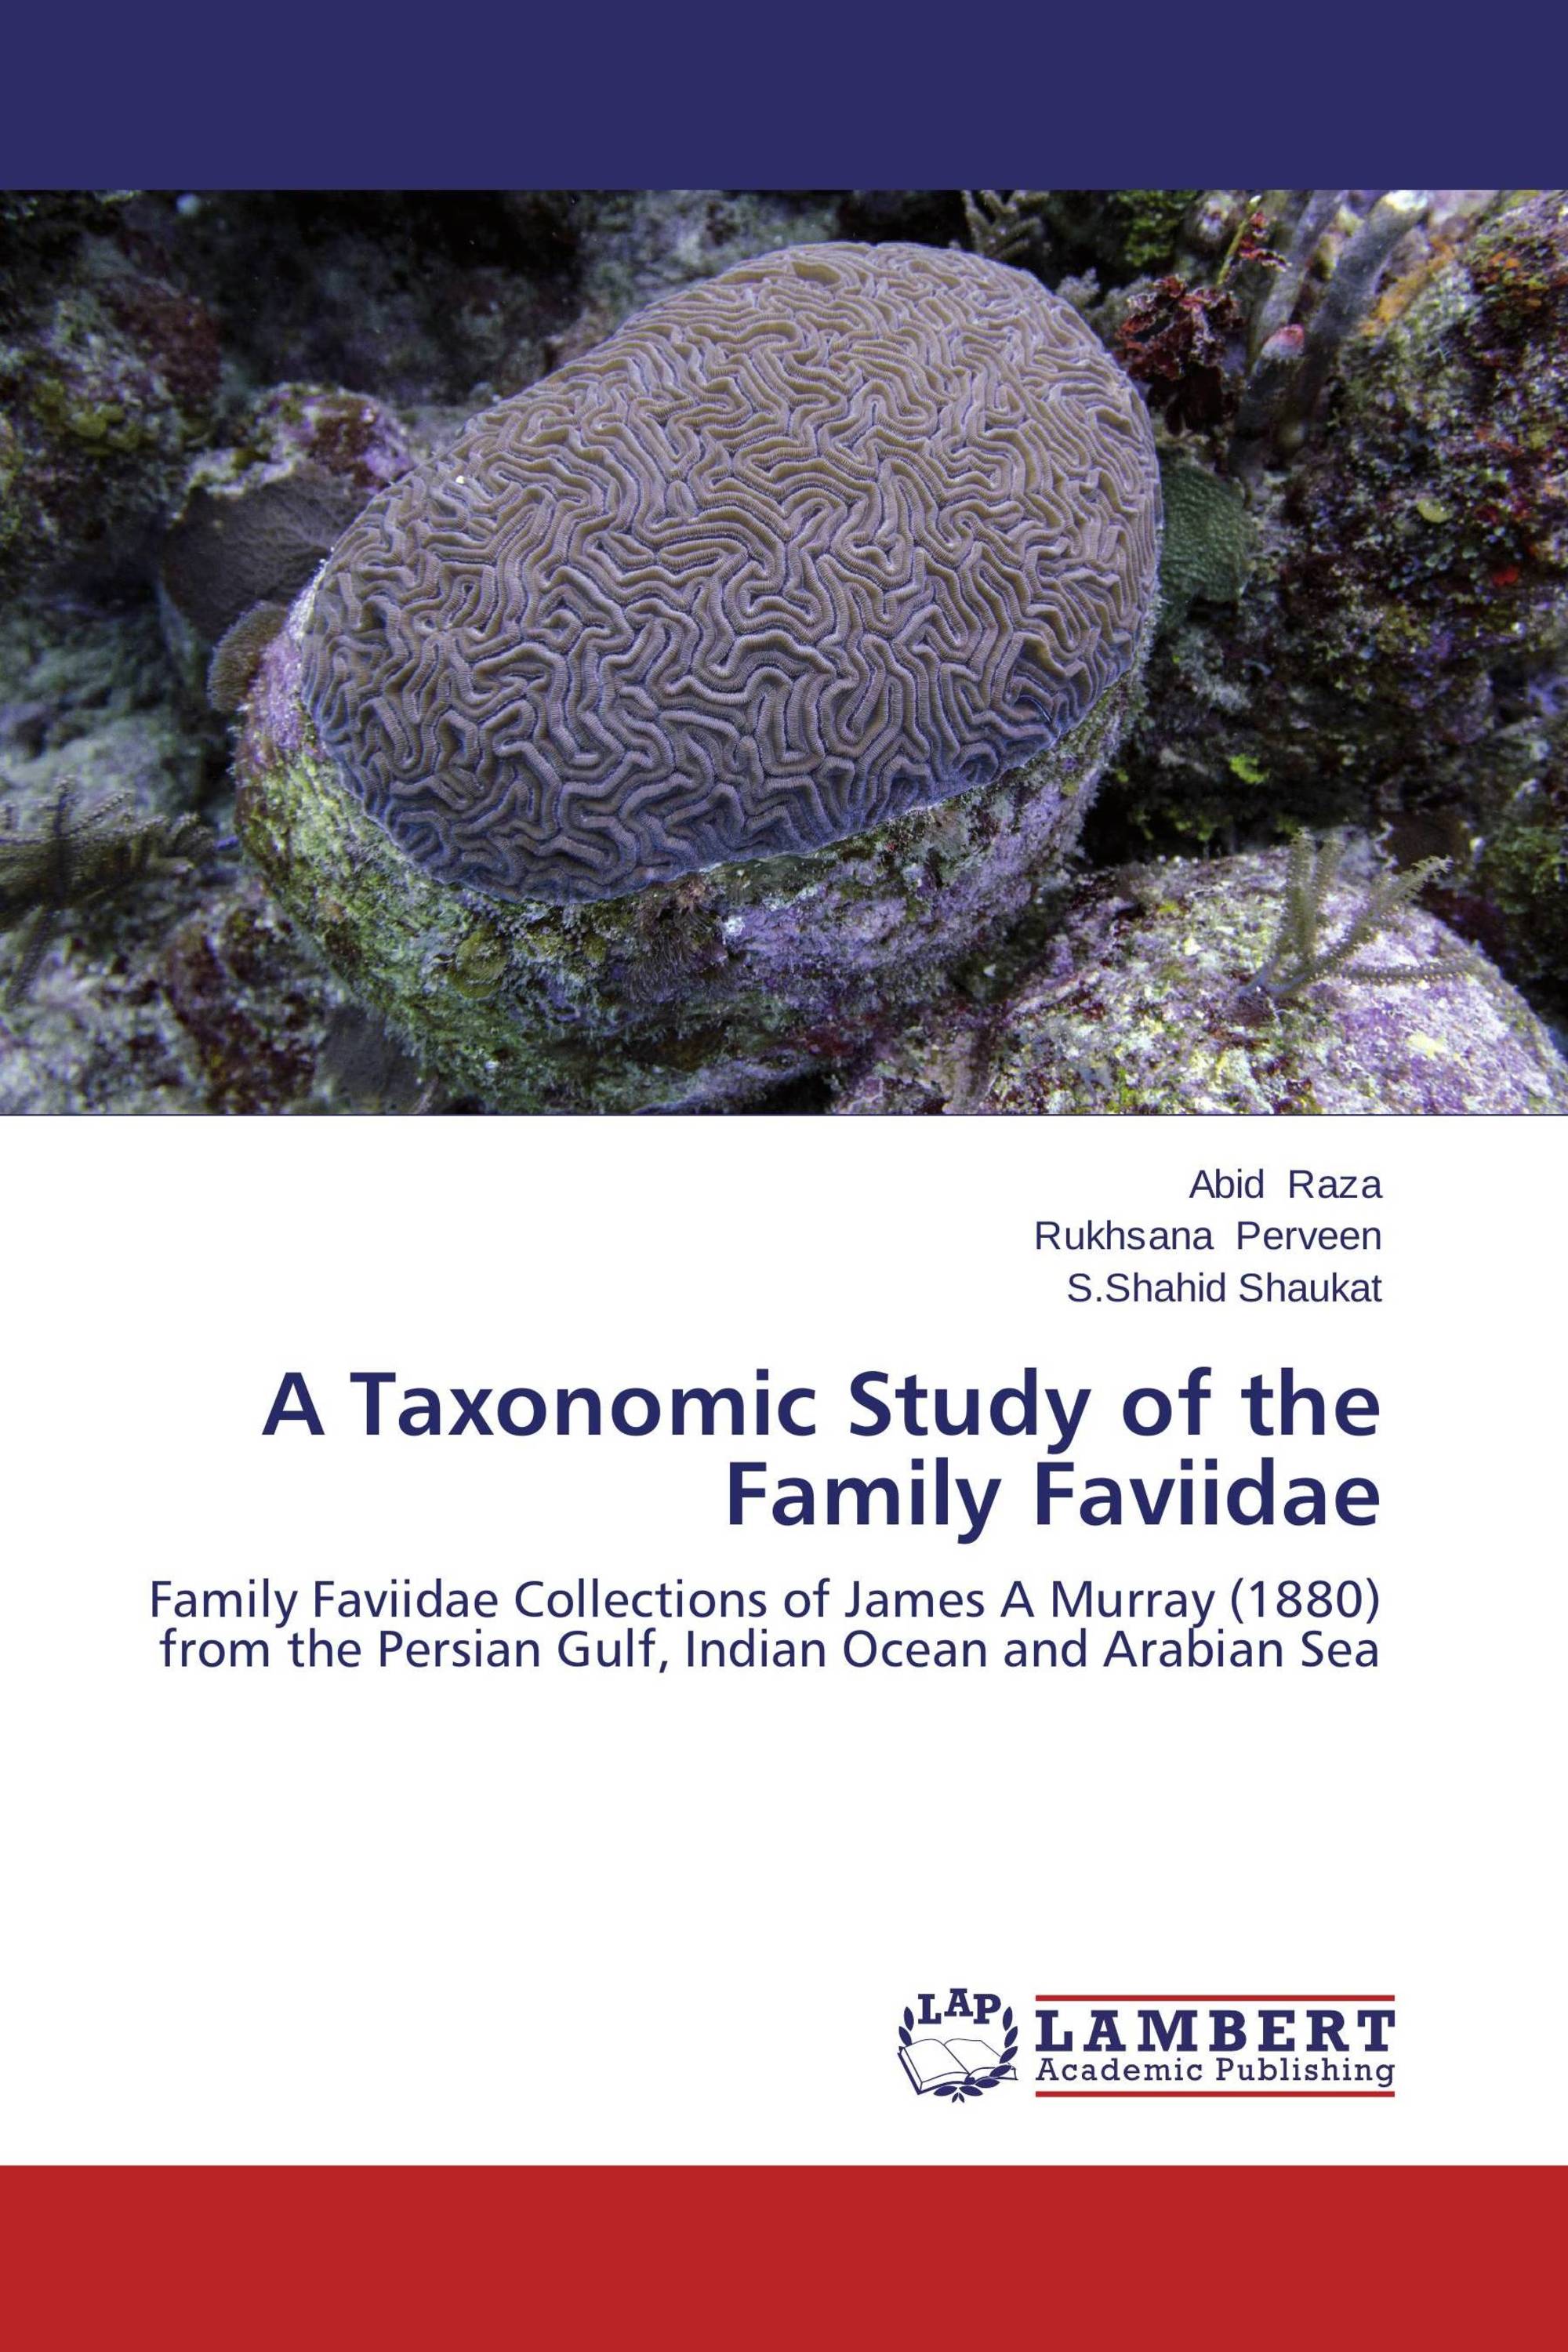 A Taxonomic Study of the Family Faviidae